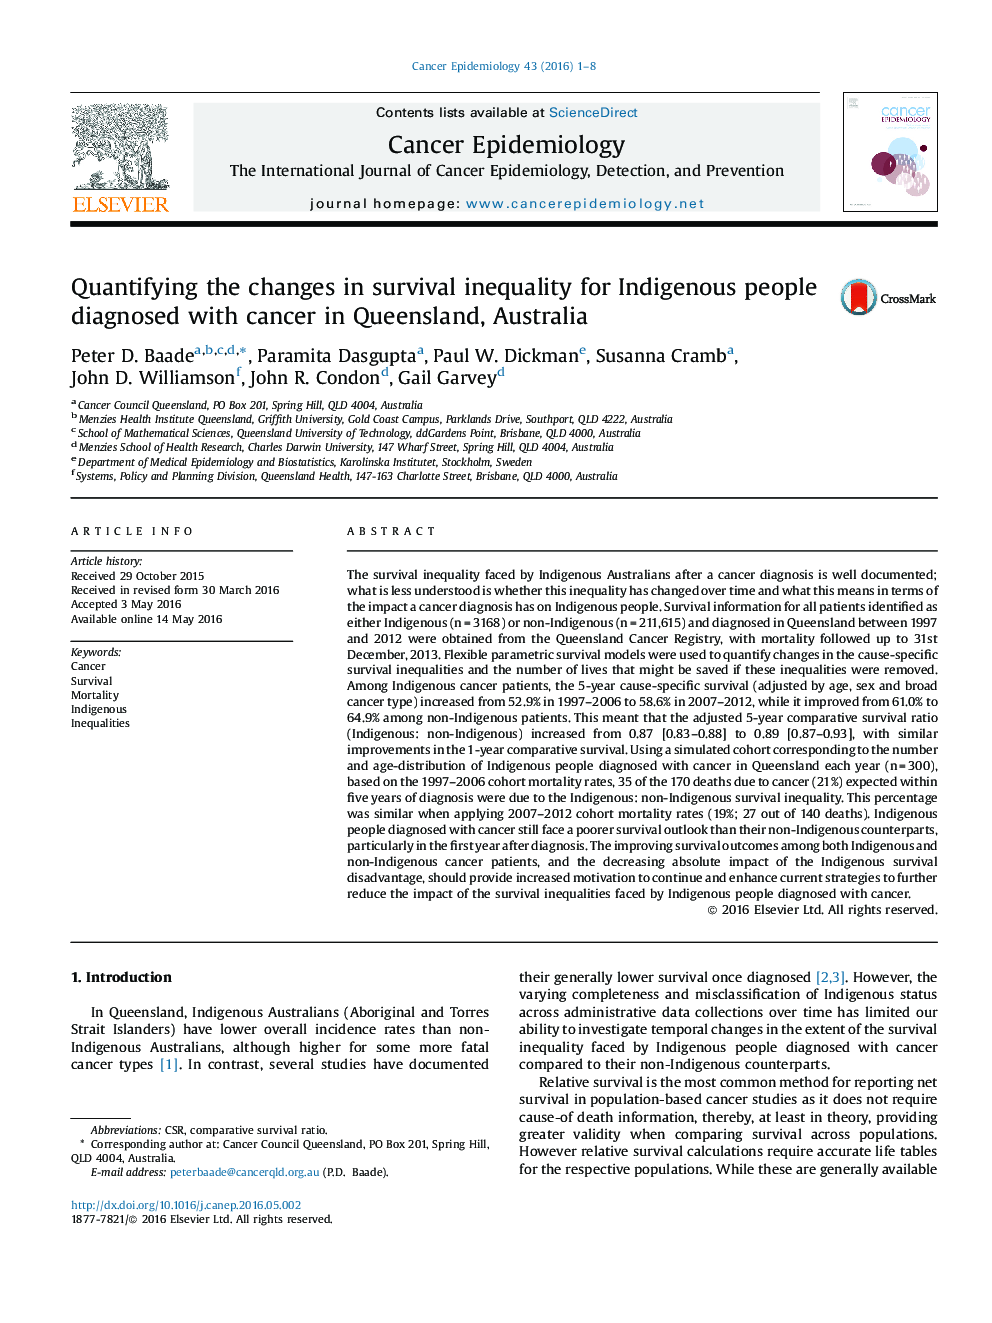 Quantifying the changes in survival inequality for Indigenous people diagnosed with cancer in Queensland, Australia